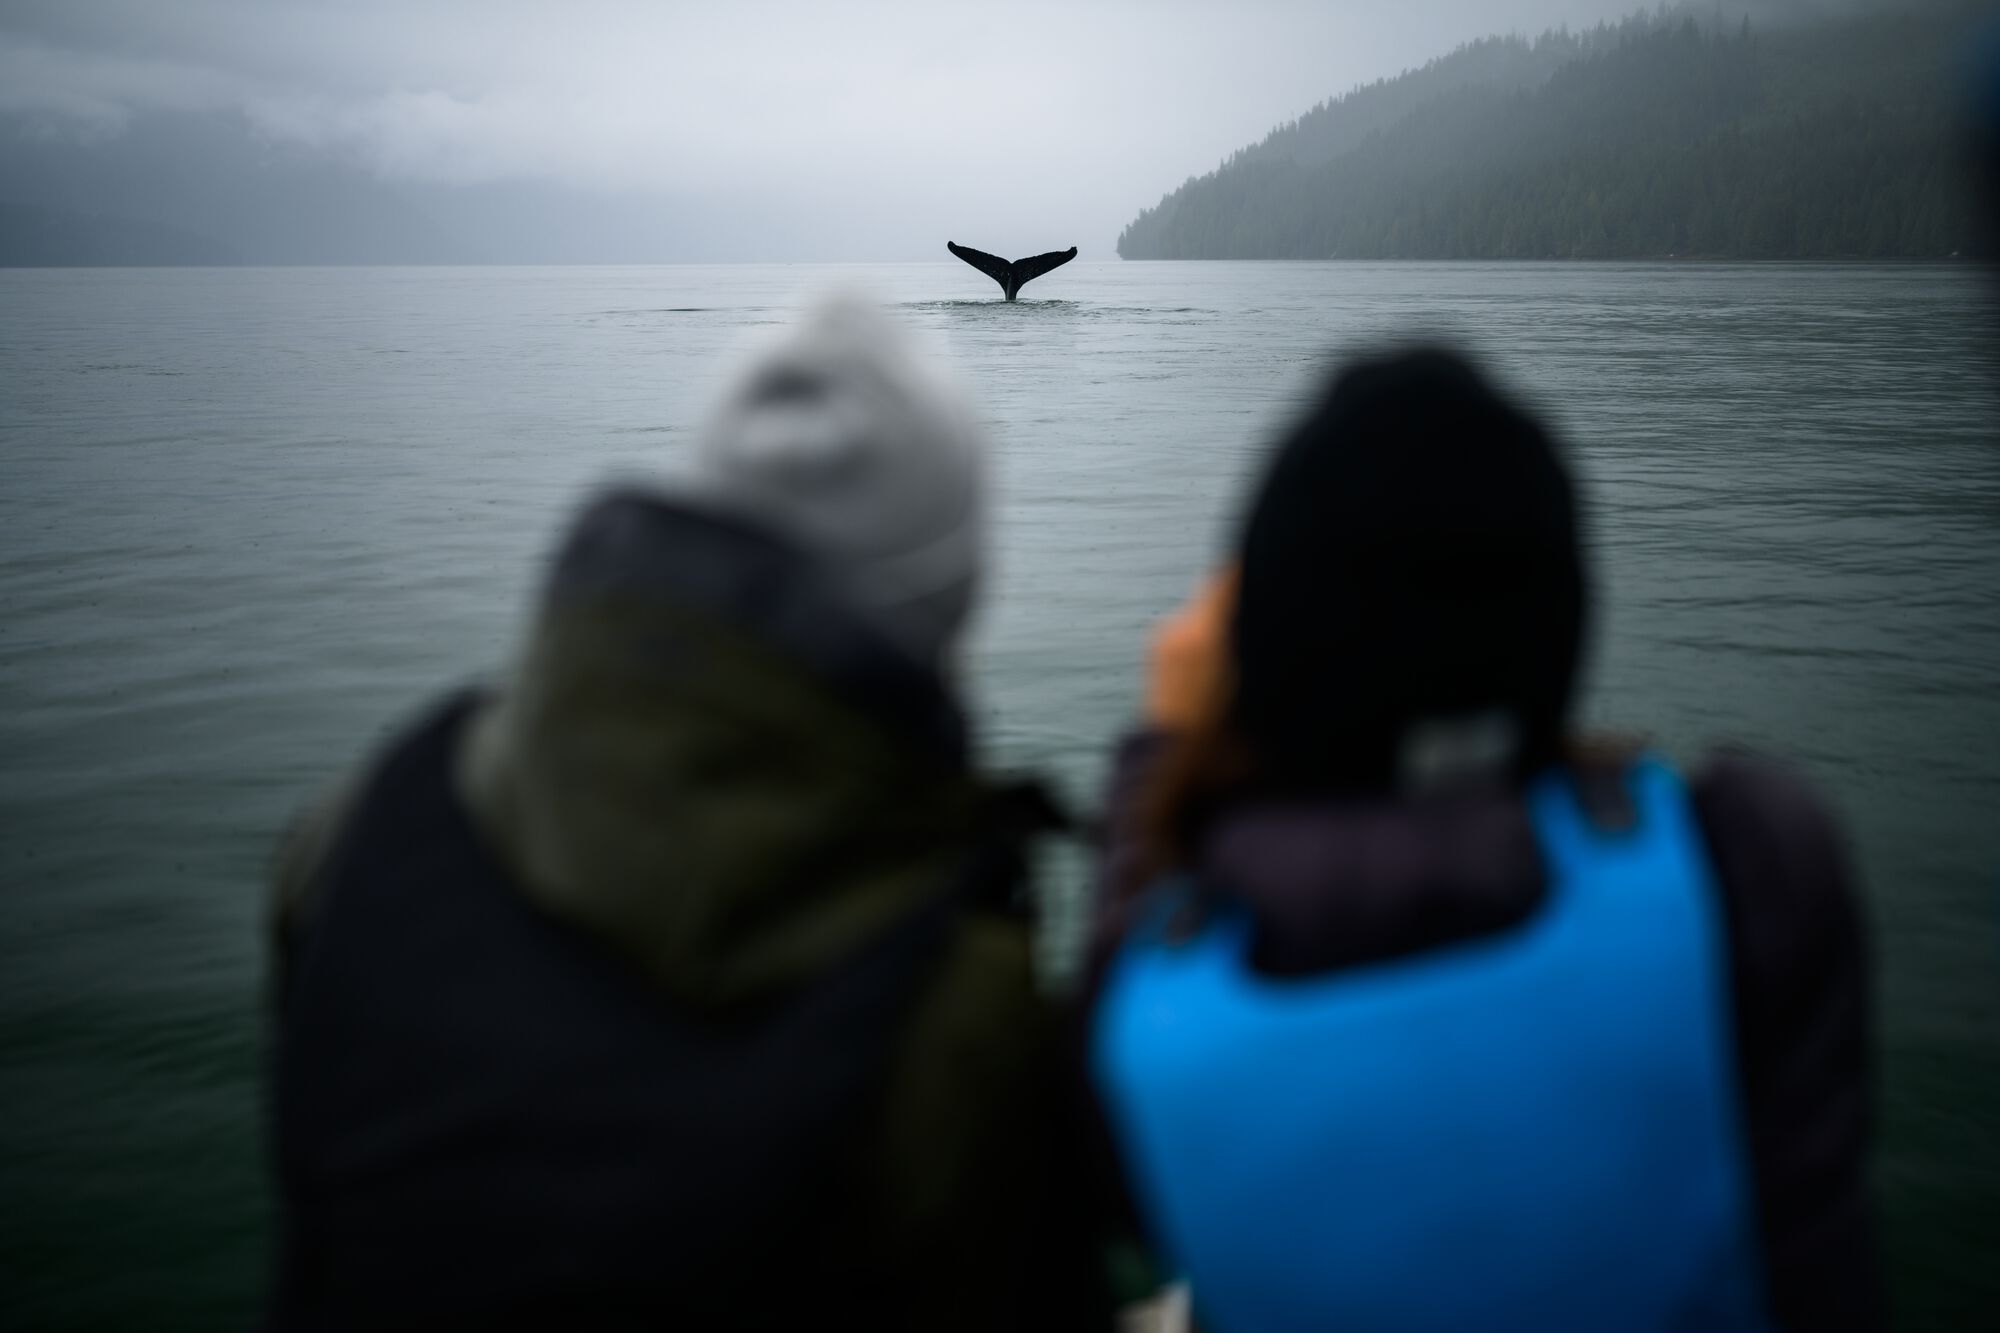 Whale watching on the Gardner Canal near Kitimat